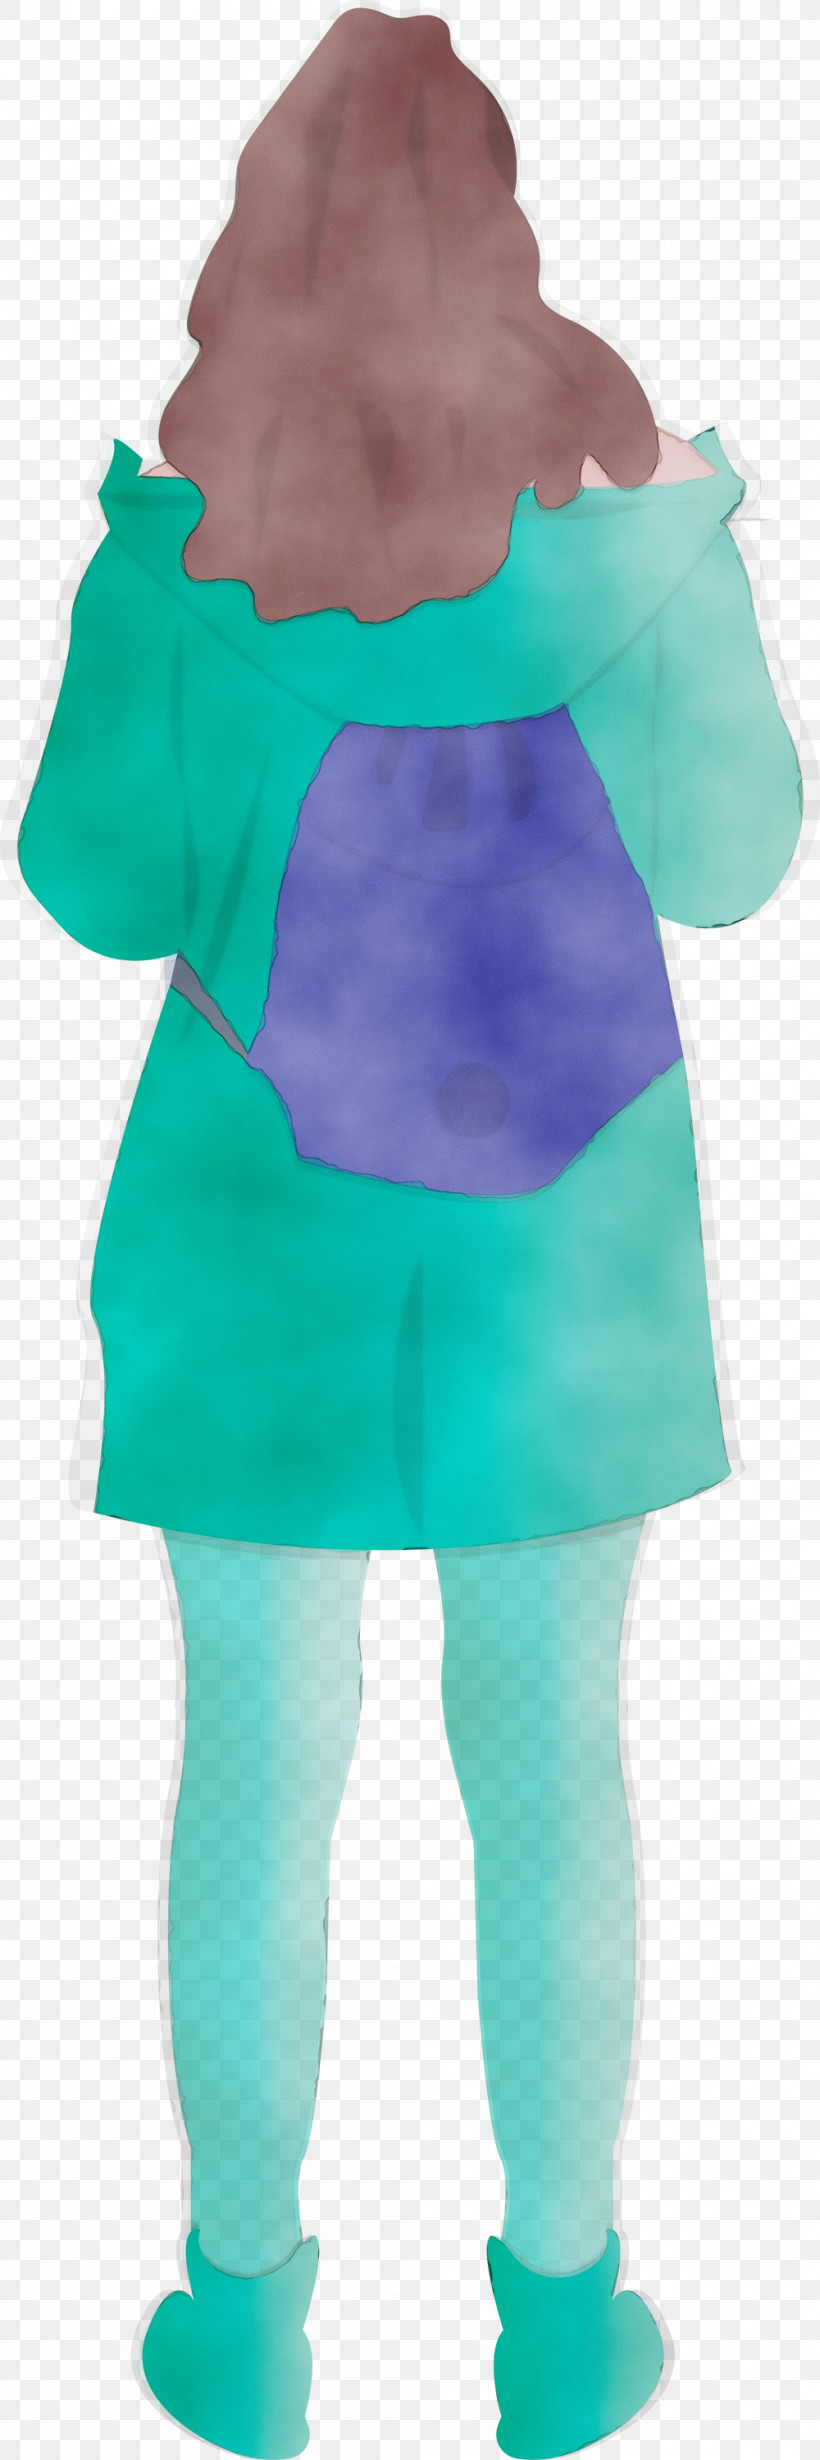 Clothing Green Blue Turquoise Teal, PNG, 1000x3000px, Girl, Aqua, Blue, Clothing, Costume Download Free